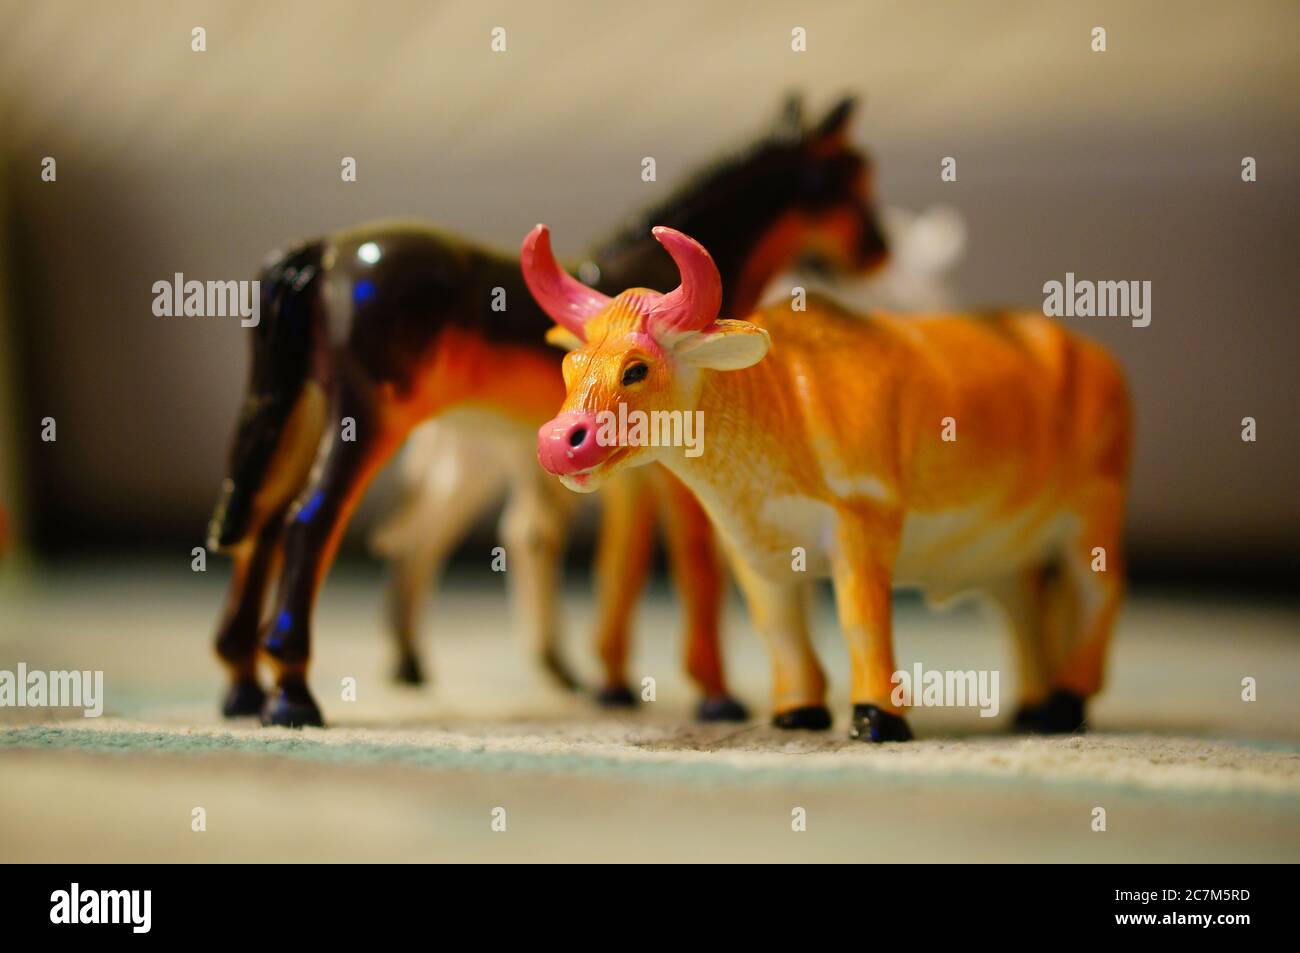 Closeup shot of toys of a bull and horse in a room Stock Photo